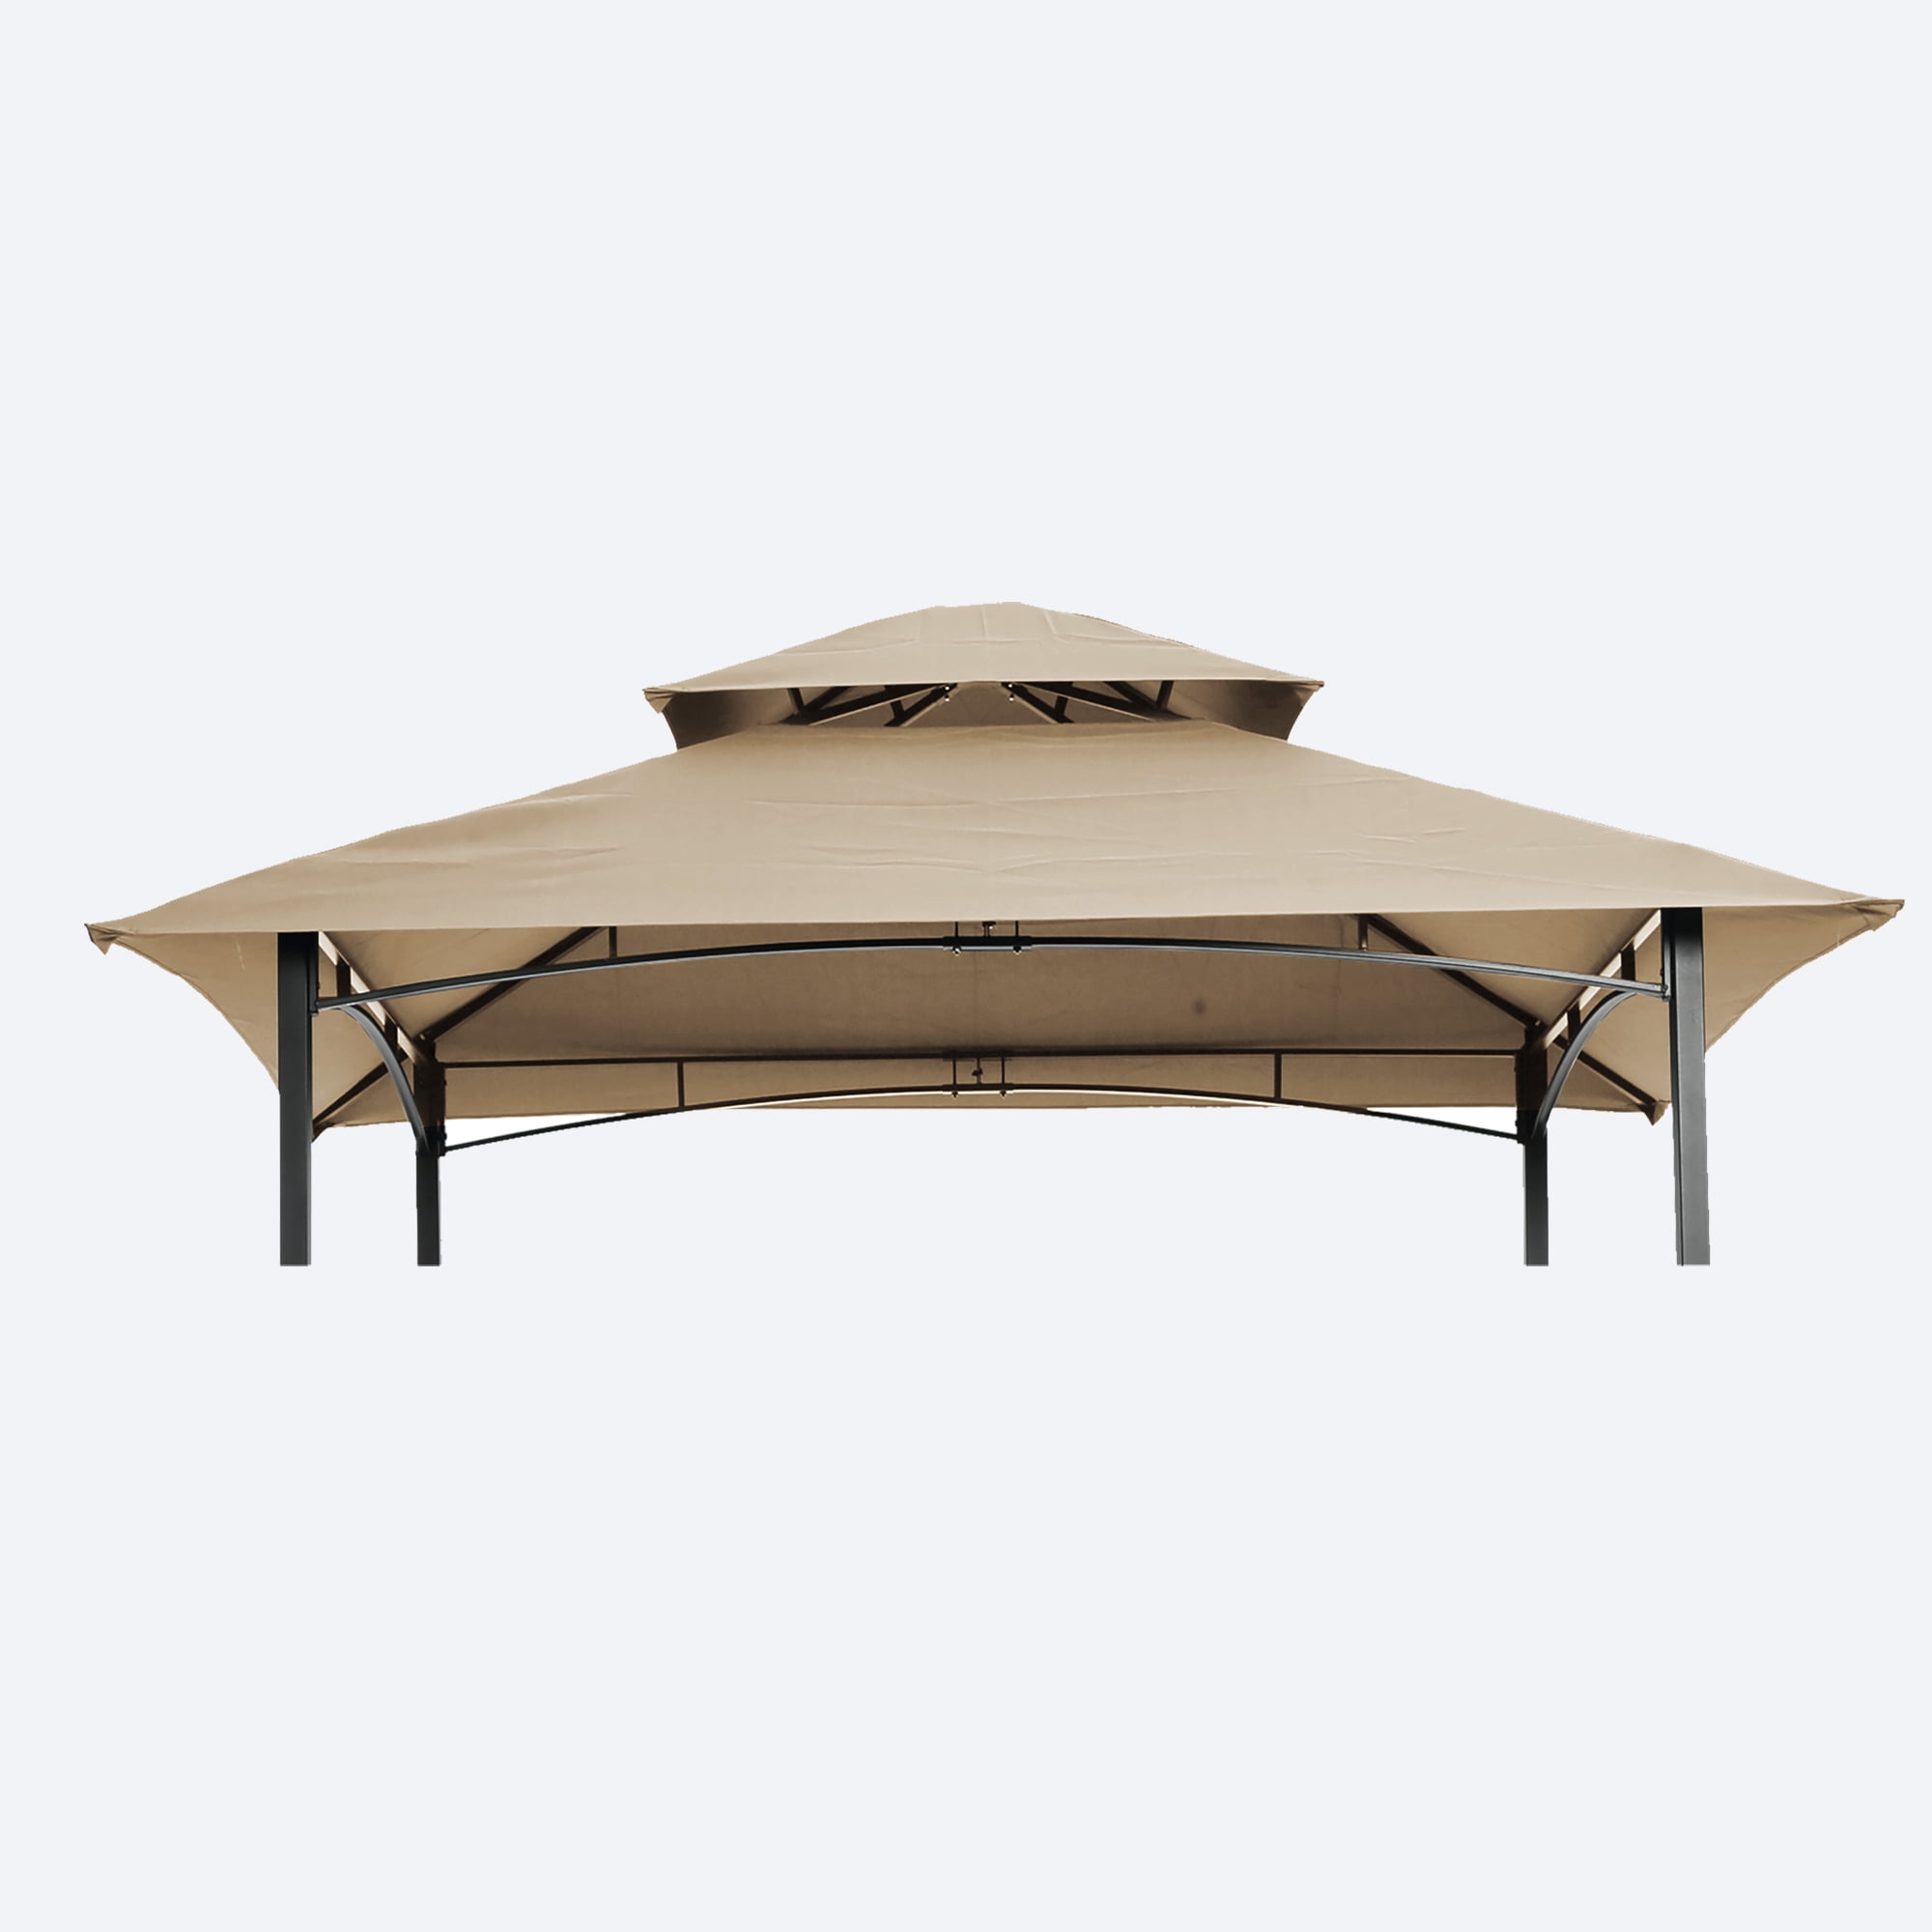 Burgundy Strong Camel Single Tier Replacement Cover for 10x10 ft Gazebo 